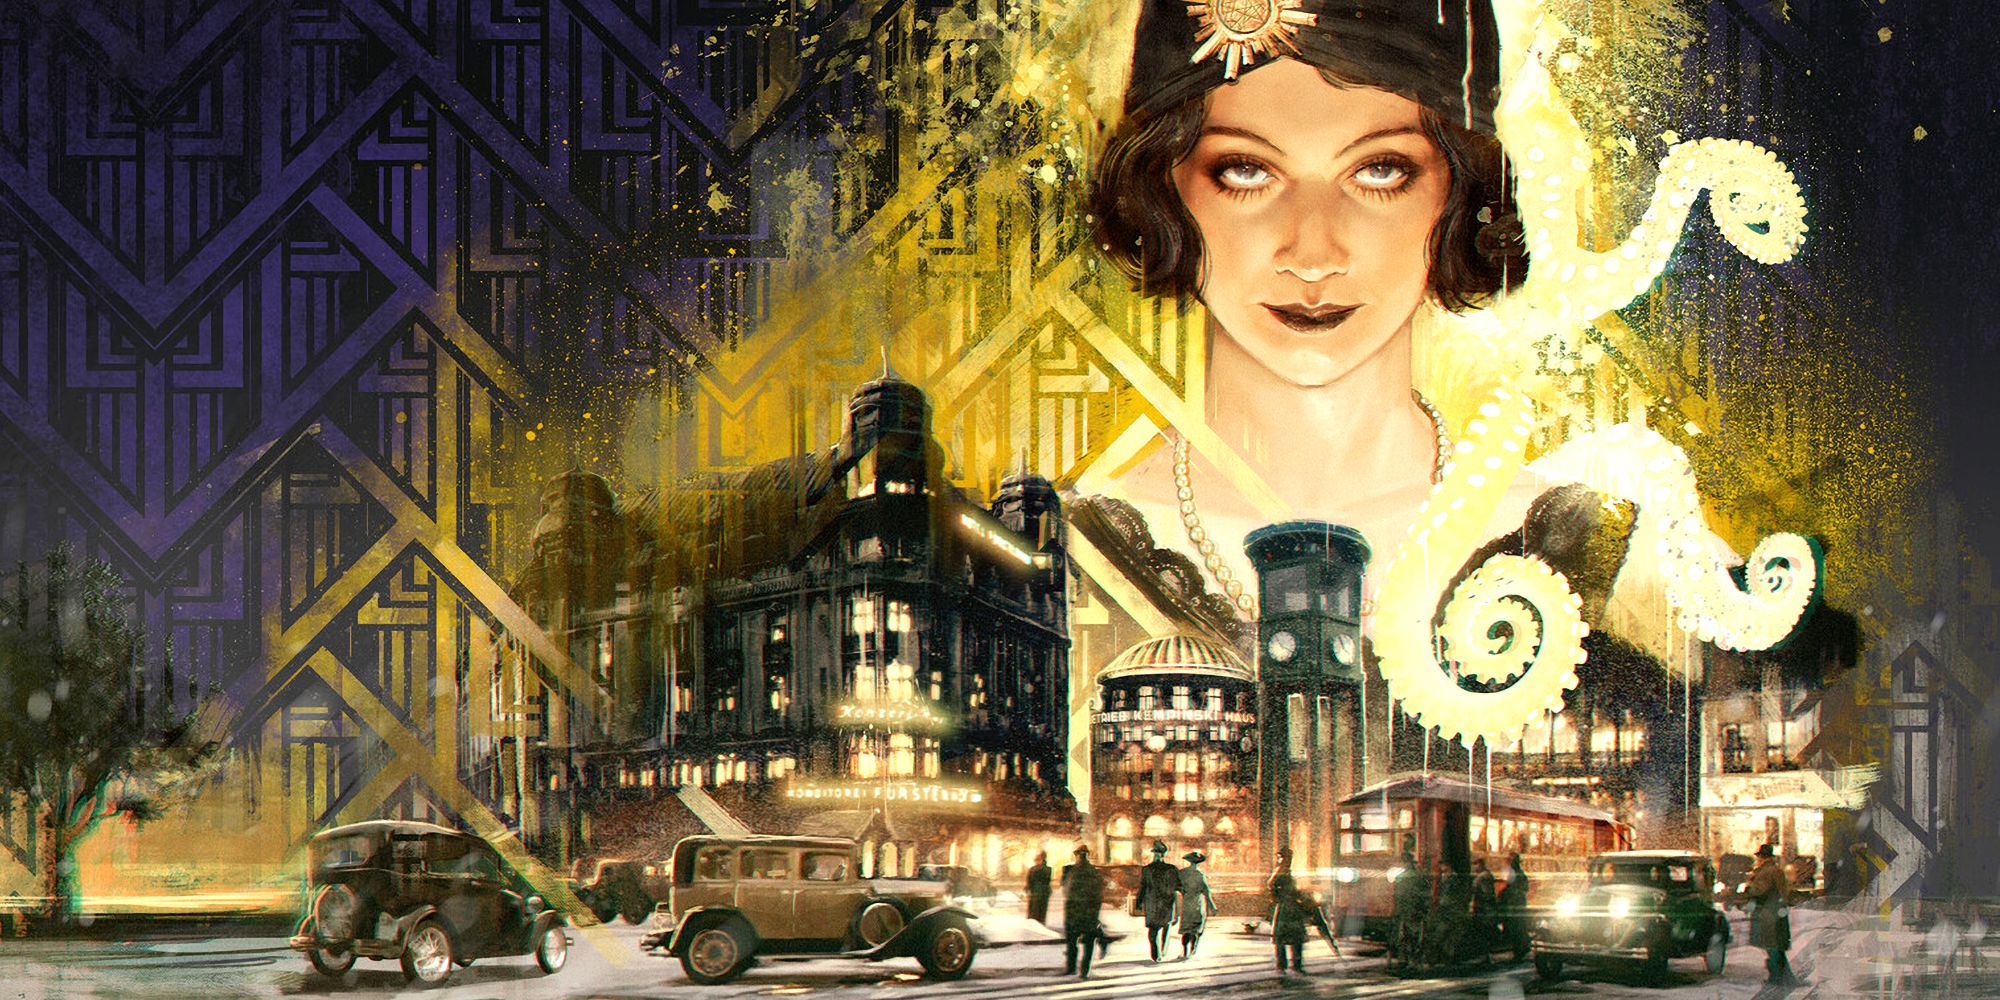 The cover artwork for Call of Cthulhu's Berlin: The Wicked City sourcebook, showing a woman in early 20th century fashion surrounded by tentacles, overlooking a Weimar Berlin city block at night.